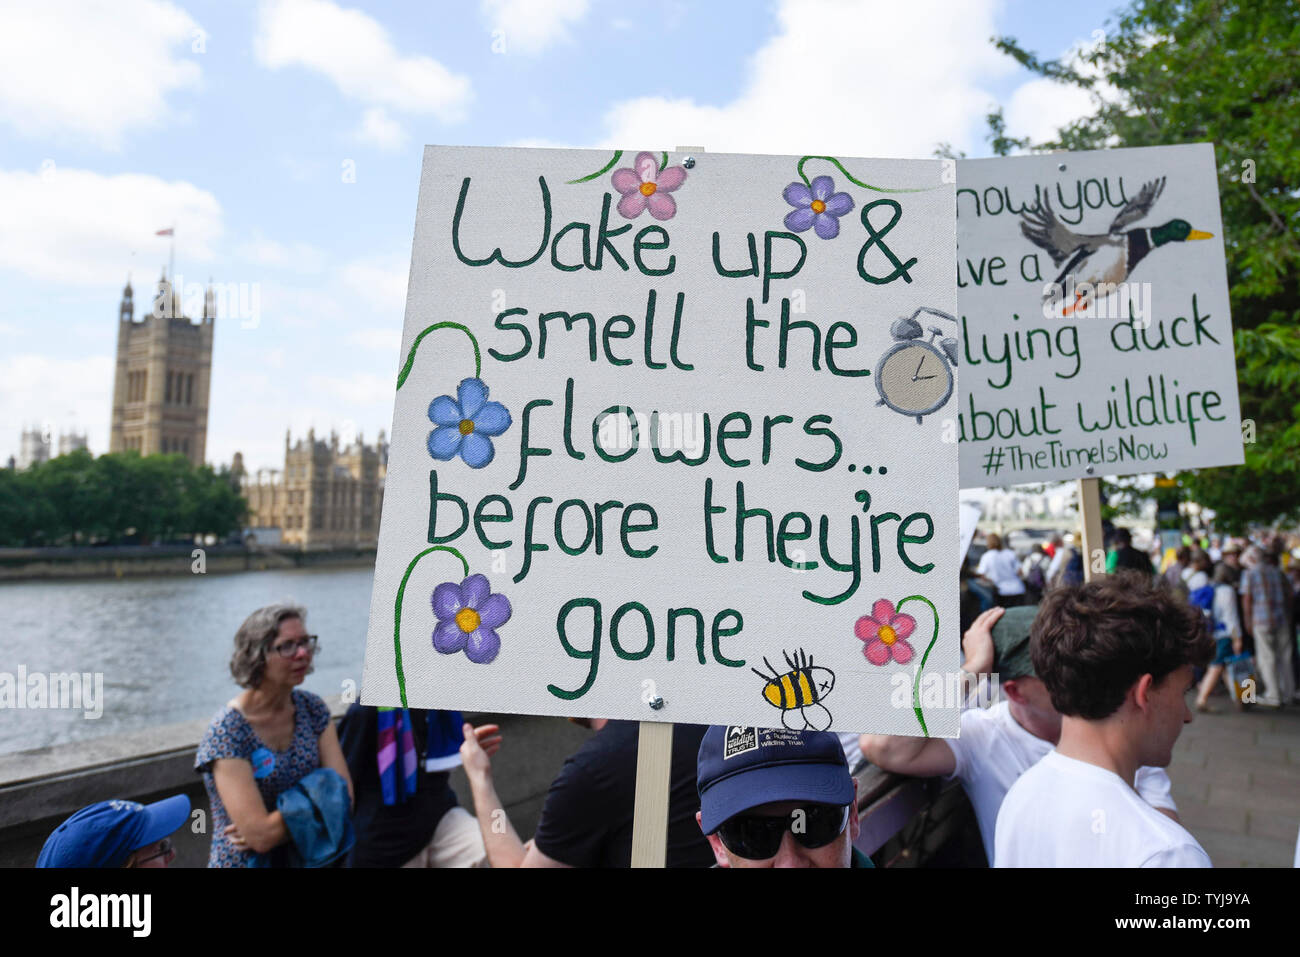 London, UK.  26 June 2019.   Signs held up by people during a 'Time Is Now' mass lobby around Parliament.  Activists are attempting to deliver a message to MPs that to tackle the environmental crisis, a strong Environment Bill is passed that can restore nature, cut plastic pollution and improve air quality.  Similar gatherings are taking place across the UK.  Credit: Stephen Chung / Alamy Live News Stock Photo